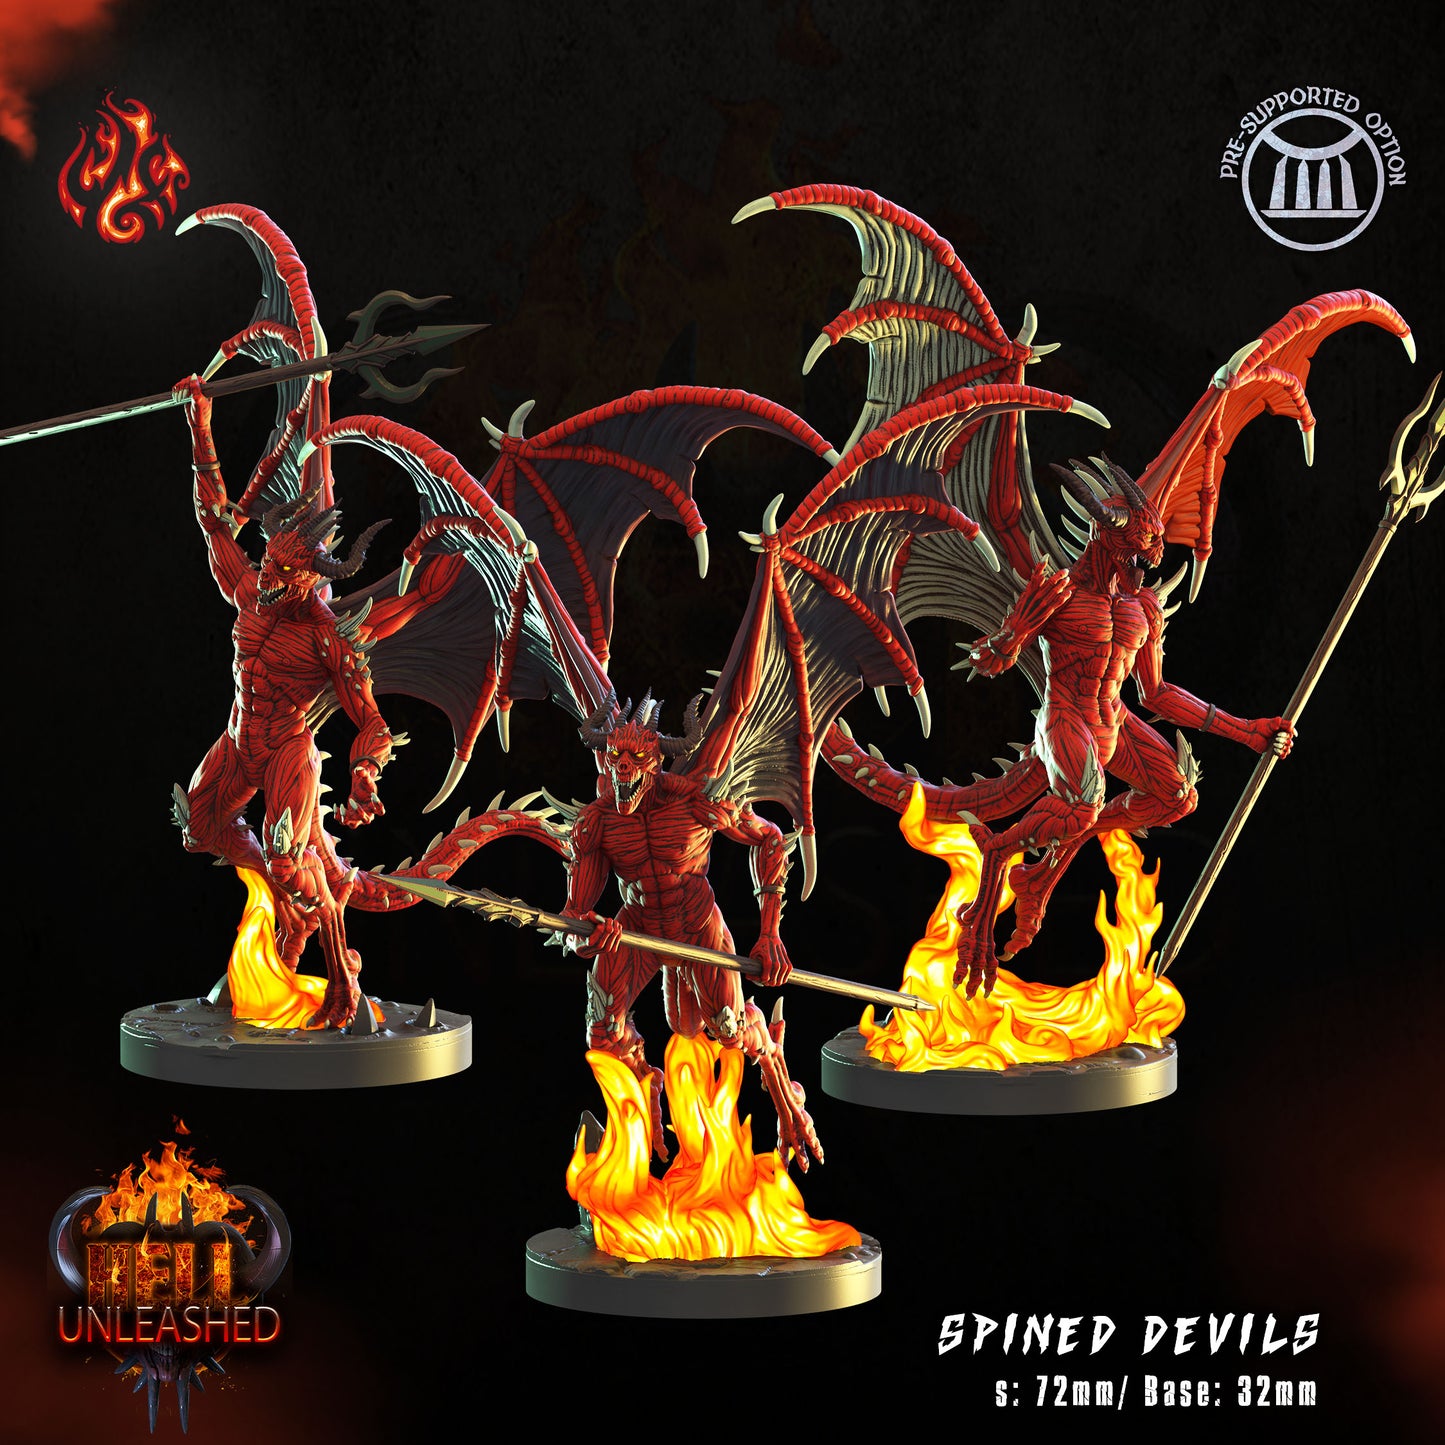 Spined Devils - Hell Unleashed Series from Crippled God Foundry - Table-top gaming mini and collectable for painting.